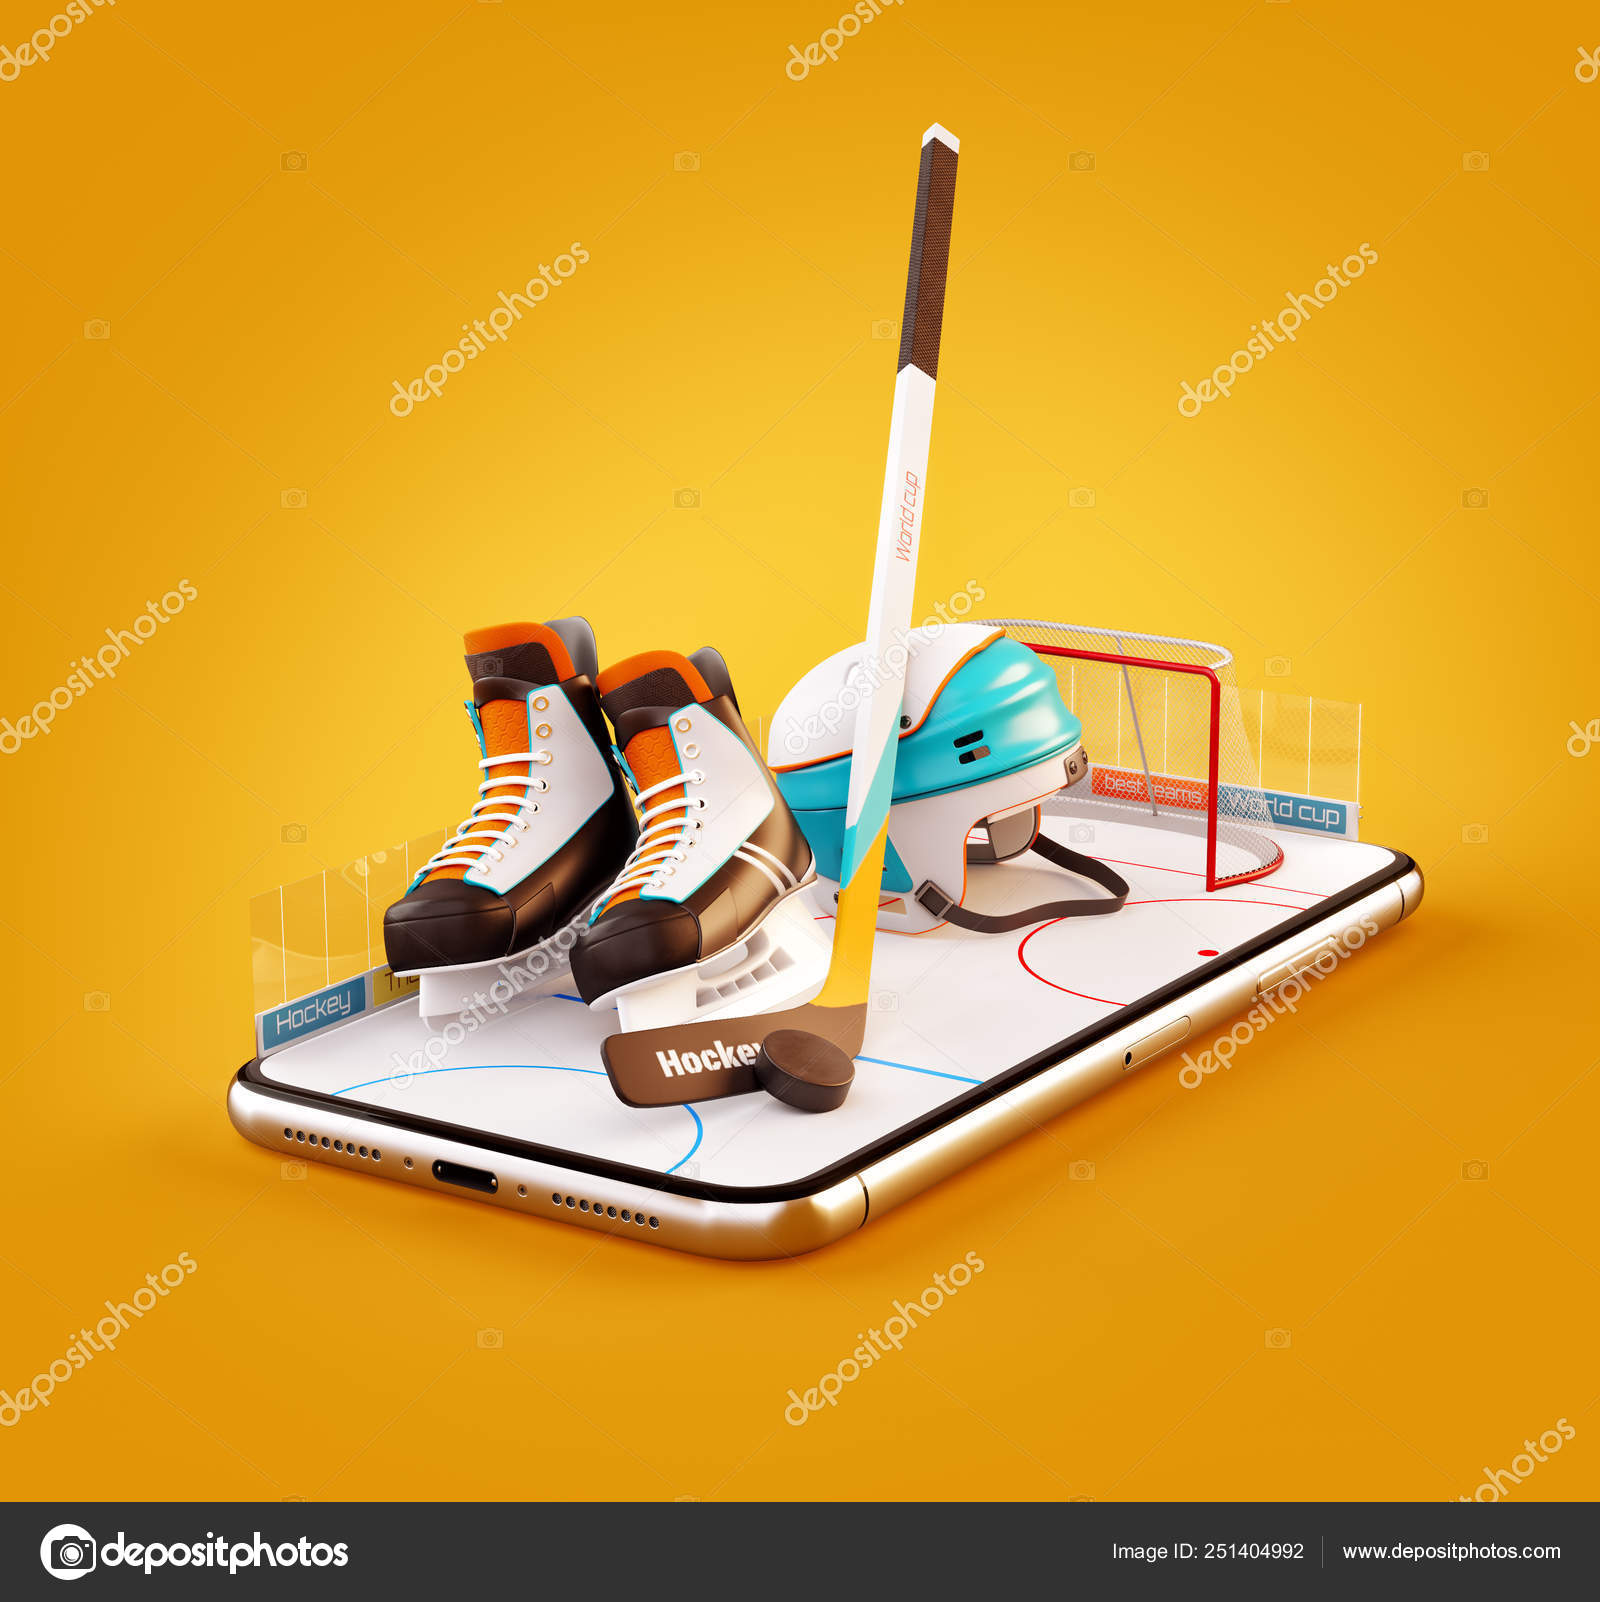 Unusual 3d illustration of hockey equipment on an ice rink on a smartphone screen